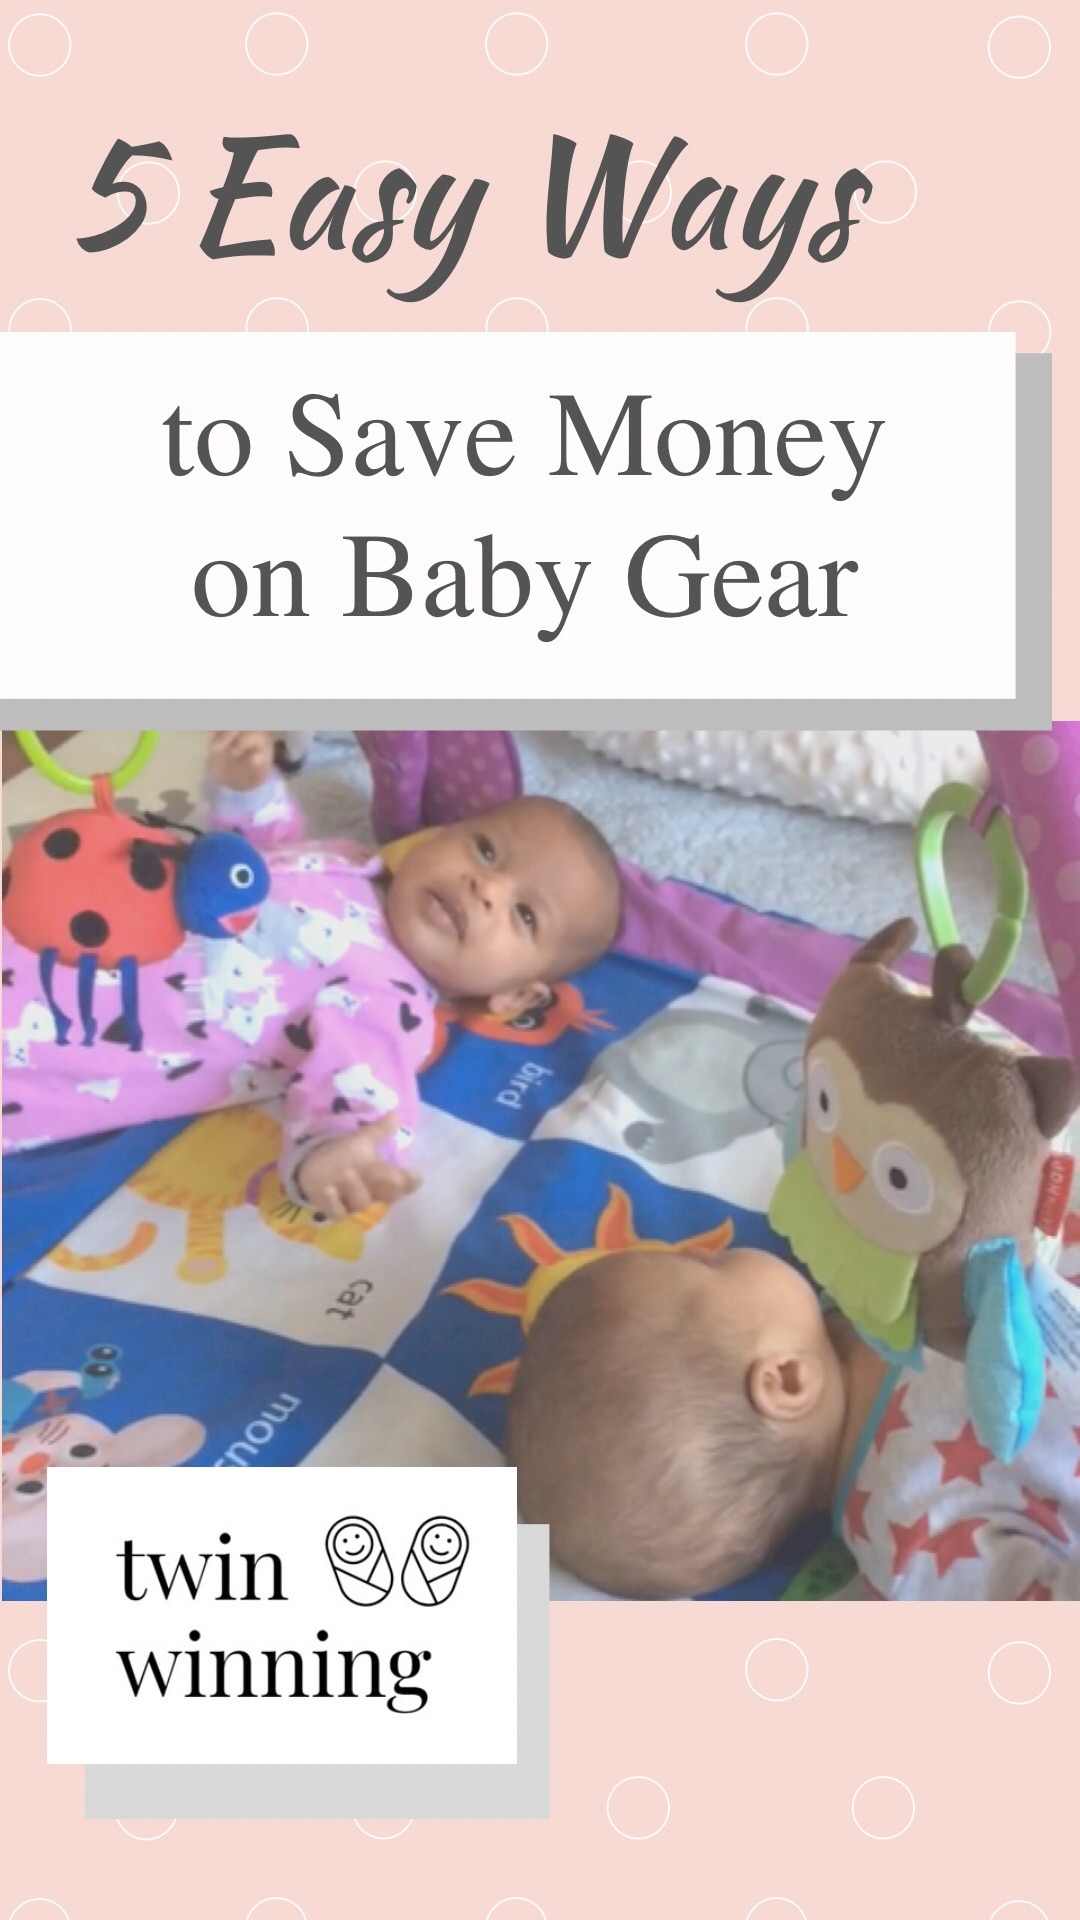 5 easy ways to save money on baby gear